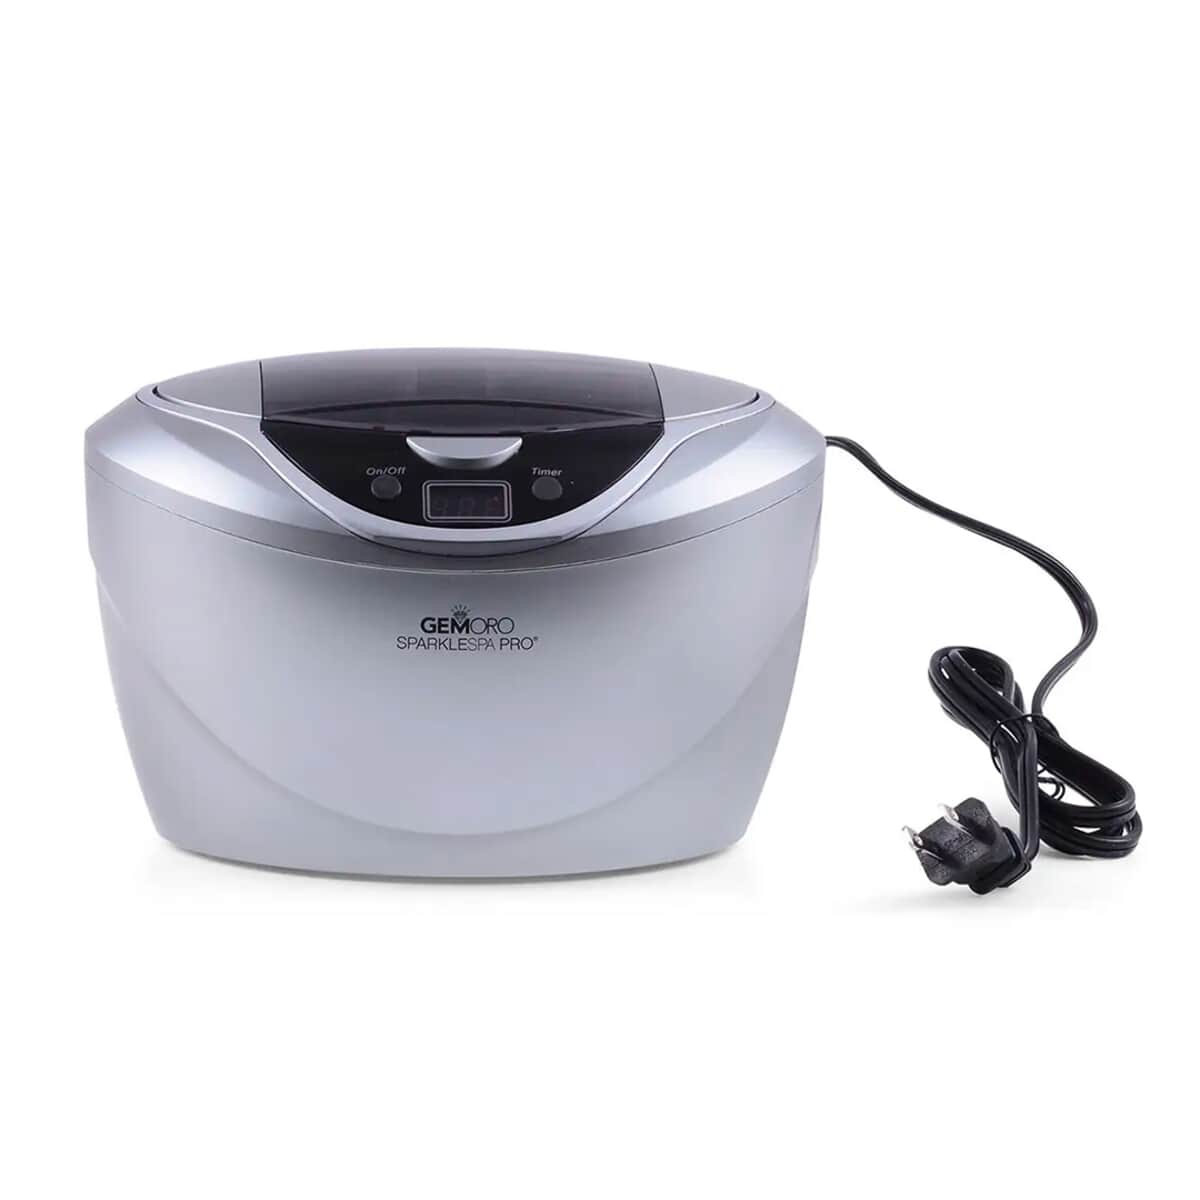 Gemoro Sparkle Spa Pro: Deluxe Personal Ultrasonic Jewelry Cleaner - Grey image number 0